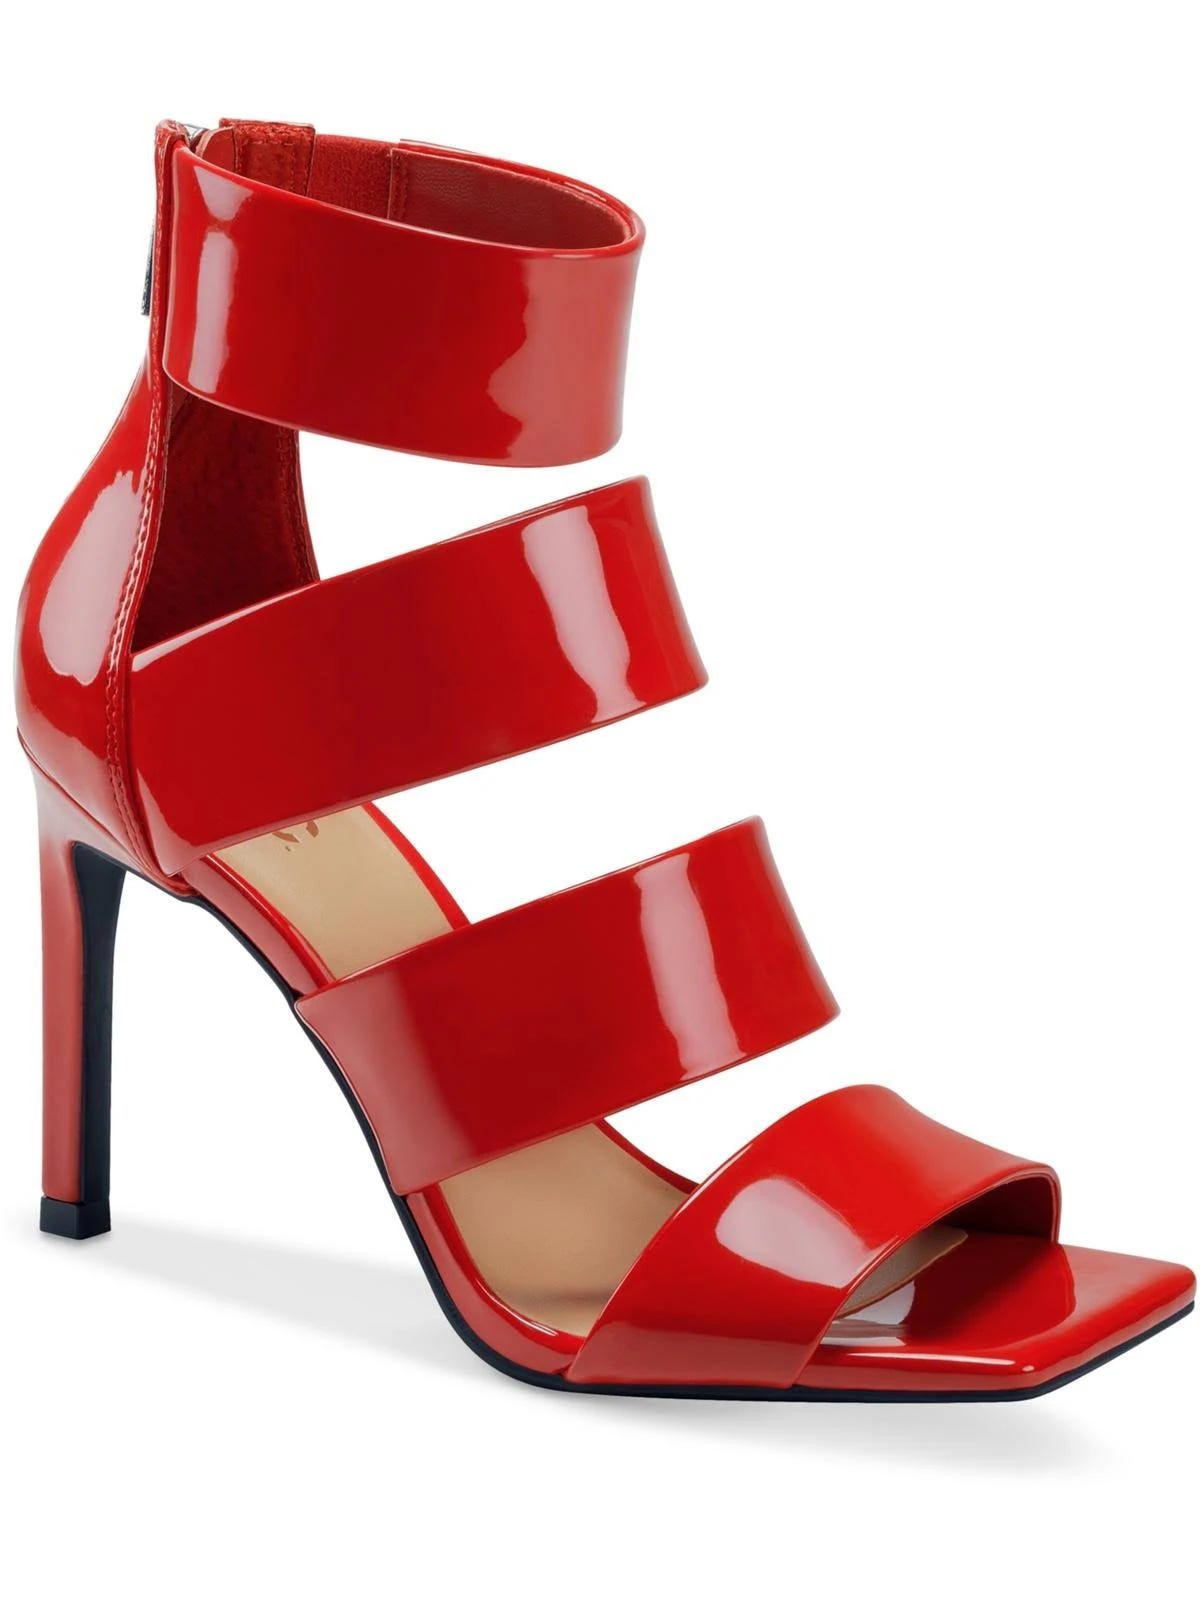 Inc Liana Red Strappy Mary Jane Heels - Women's Shoes | Image